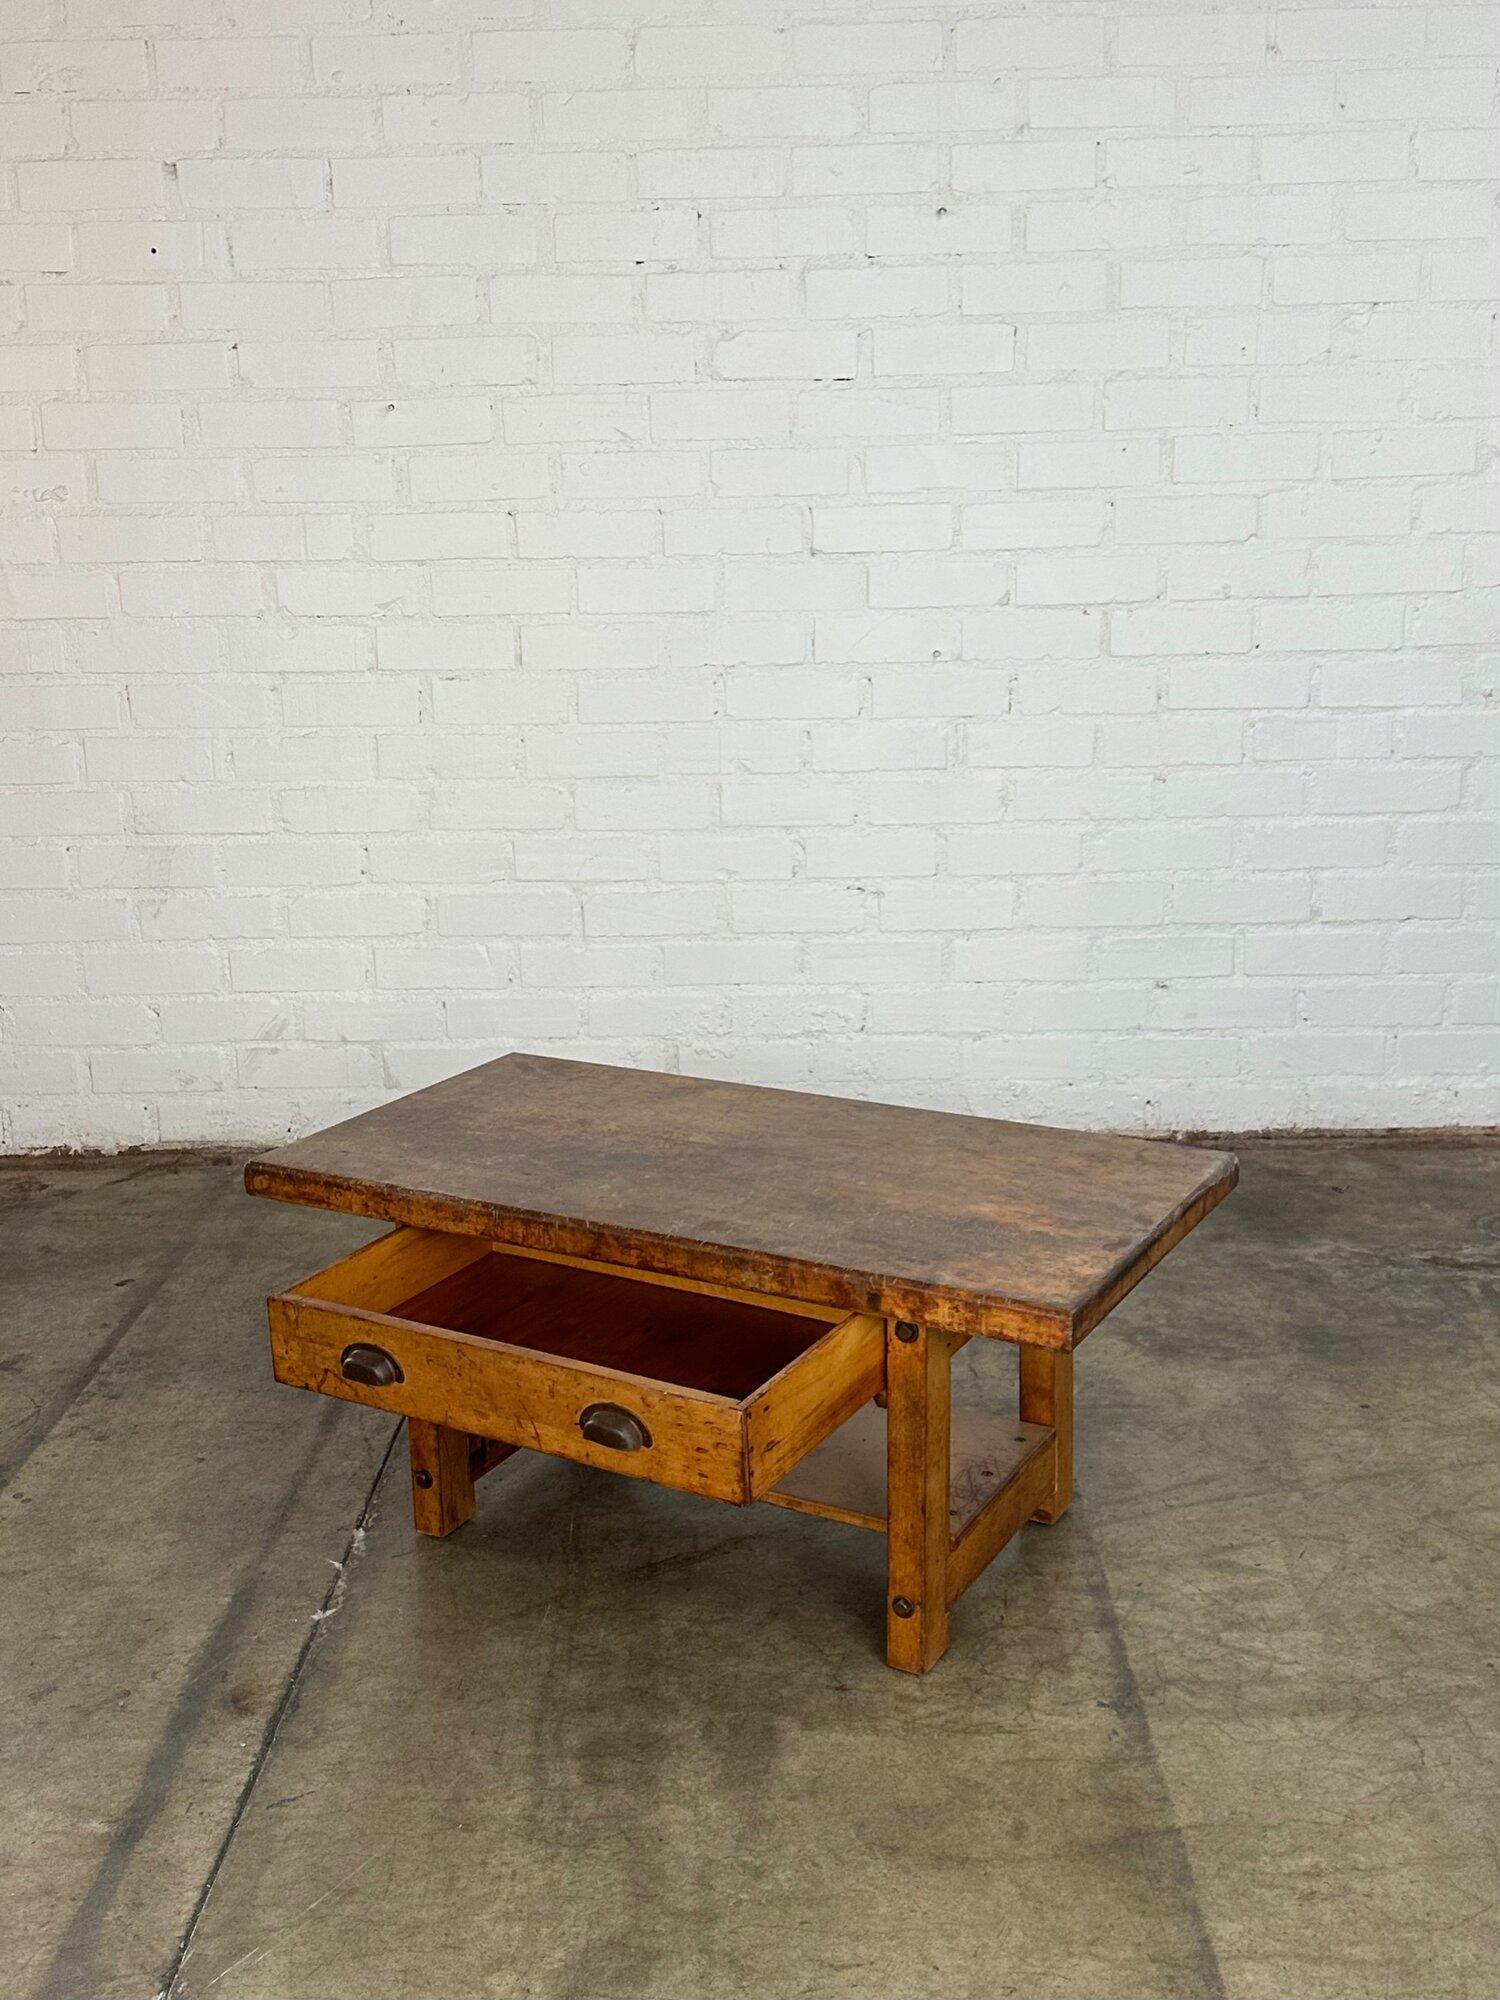 Rustic low profile work bench- reworked 3